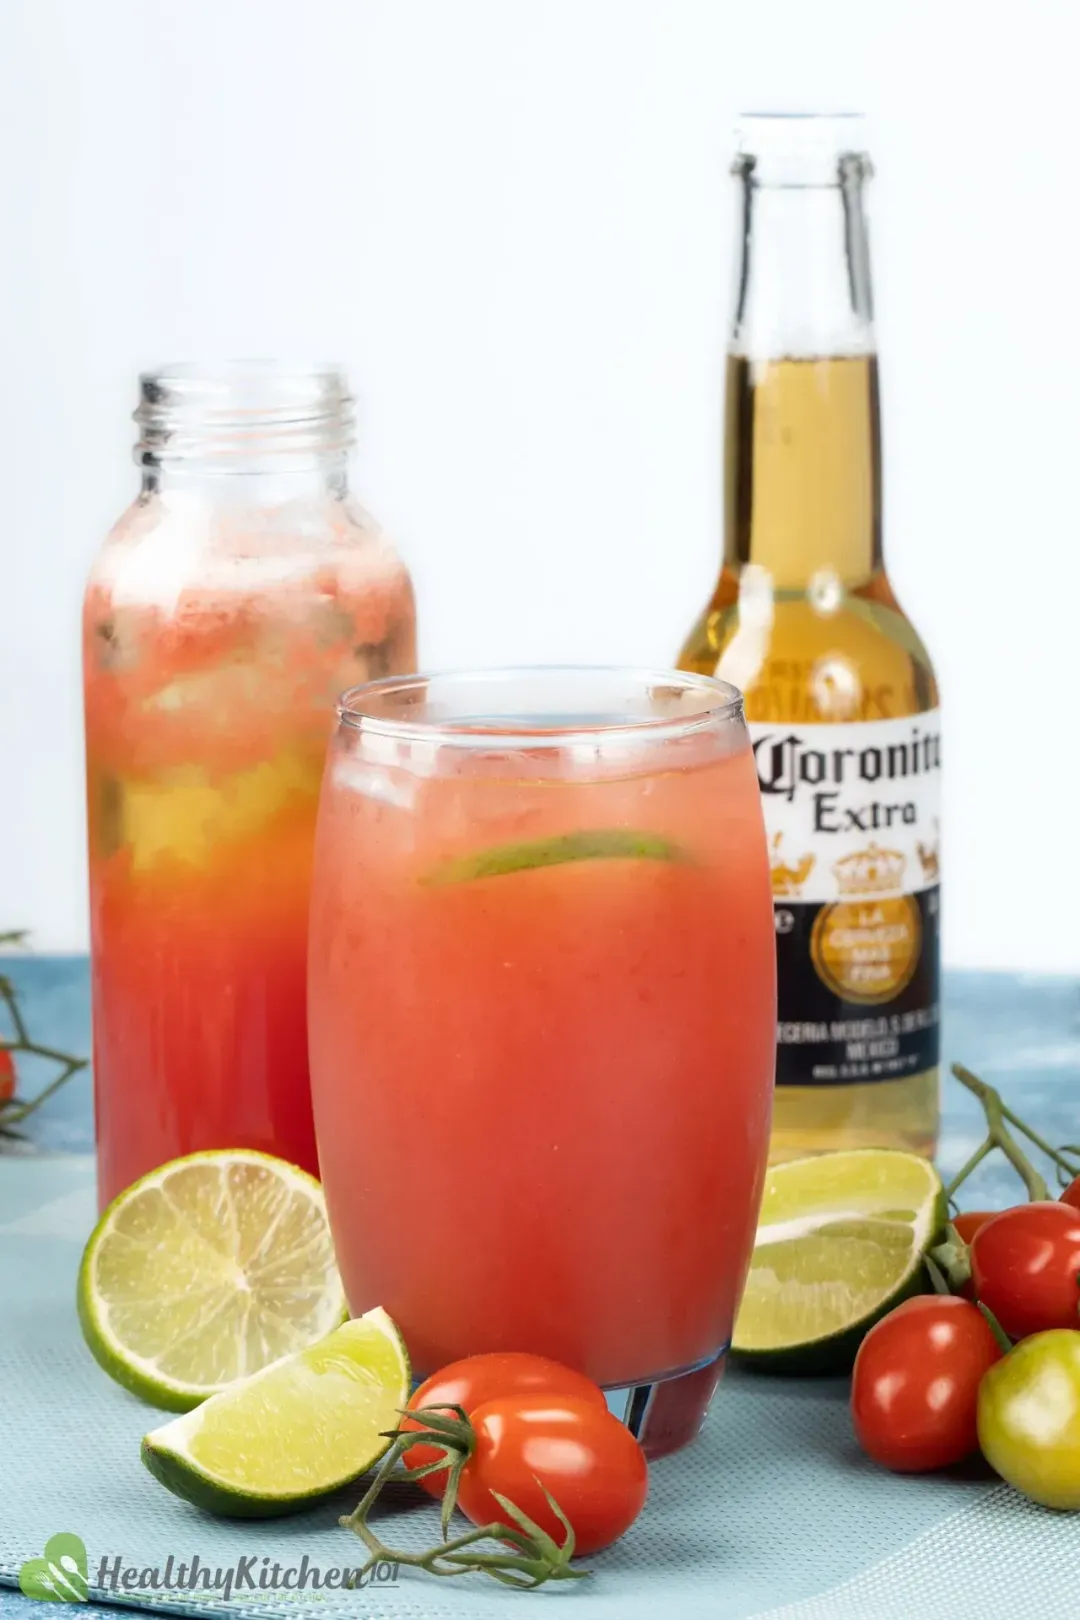 A chilled tomato and beer cocktail next to a bottle of red juice, beer bottle, lime wheels and cherry tomatoes